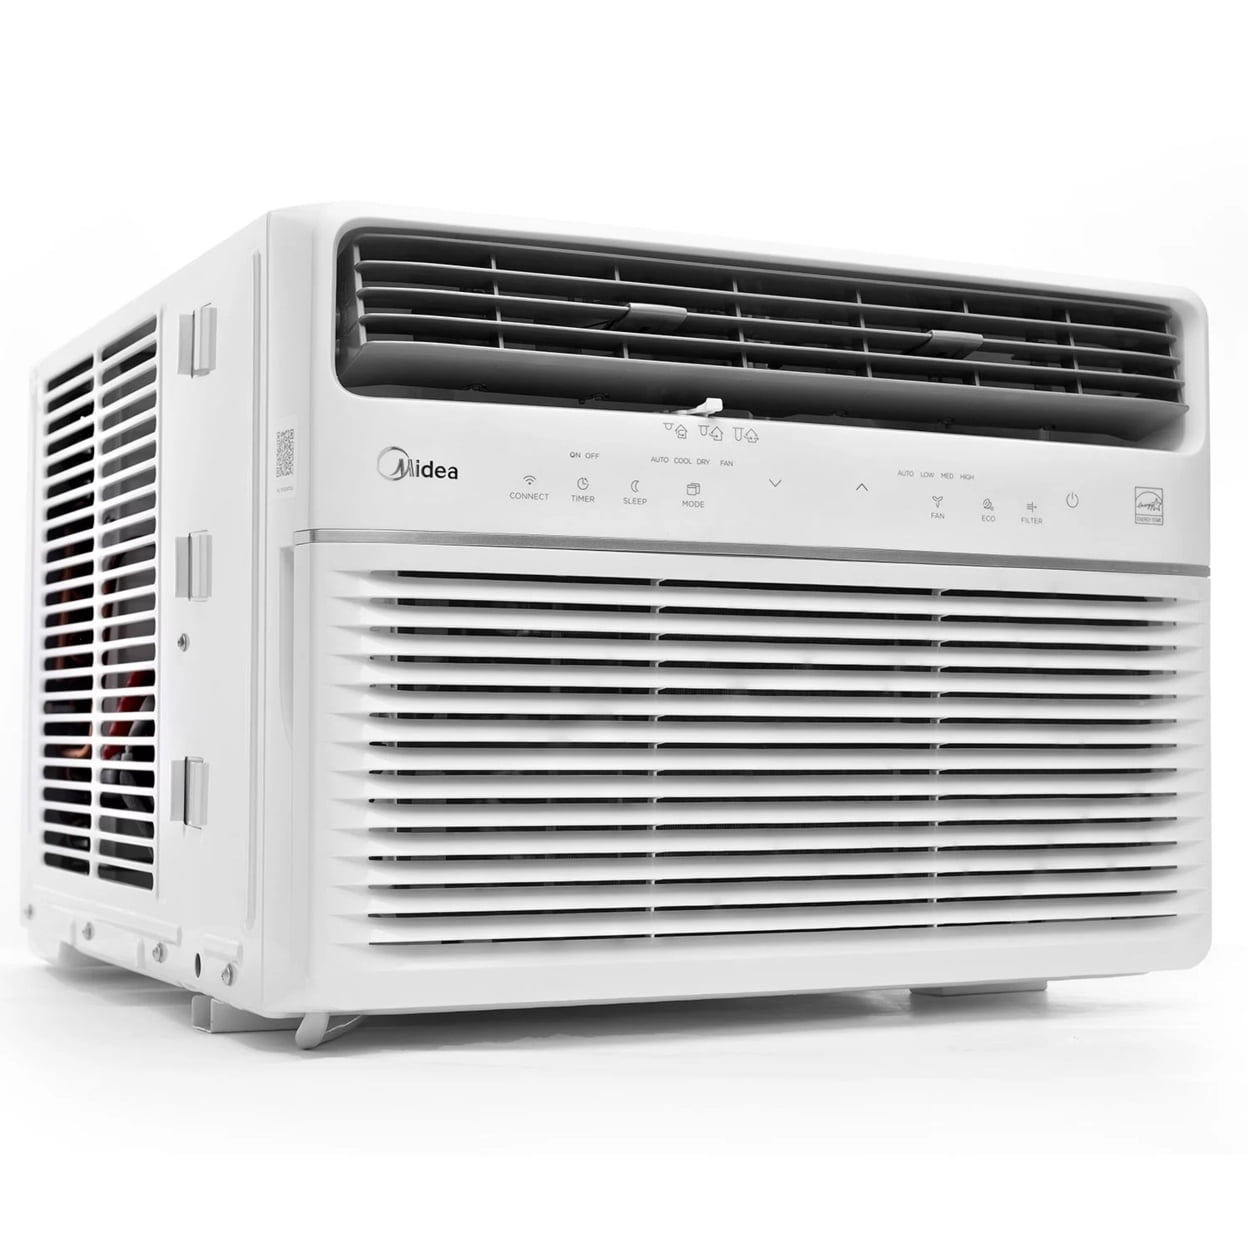 MIDEA 12,000 BTU SmartCool Window Air Conditioner with WiFi and Voice